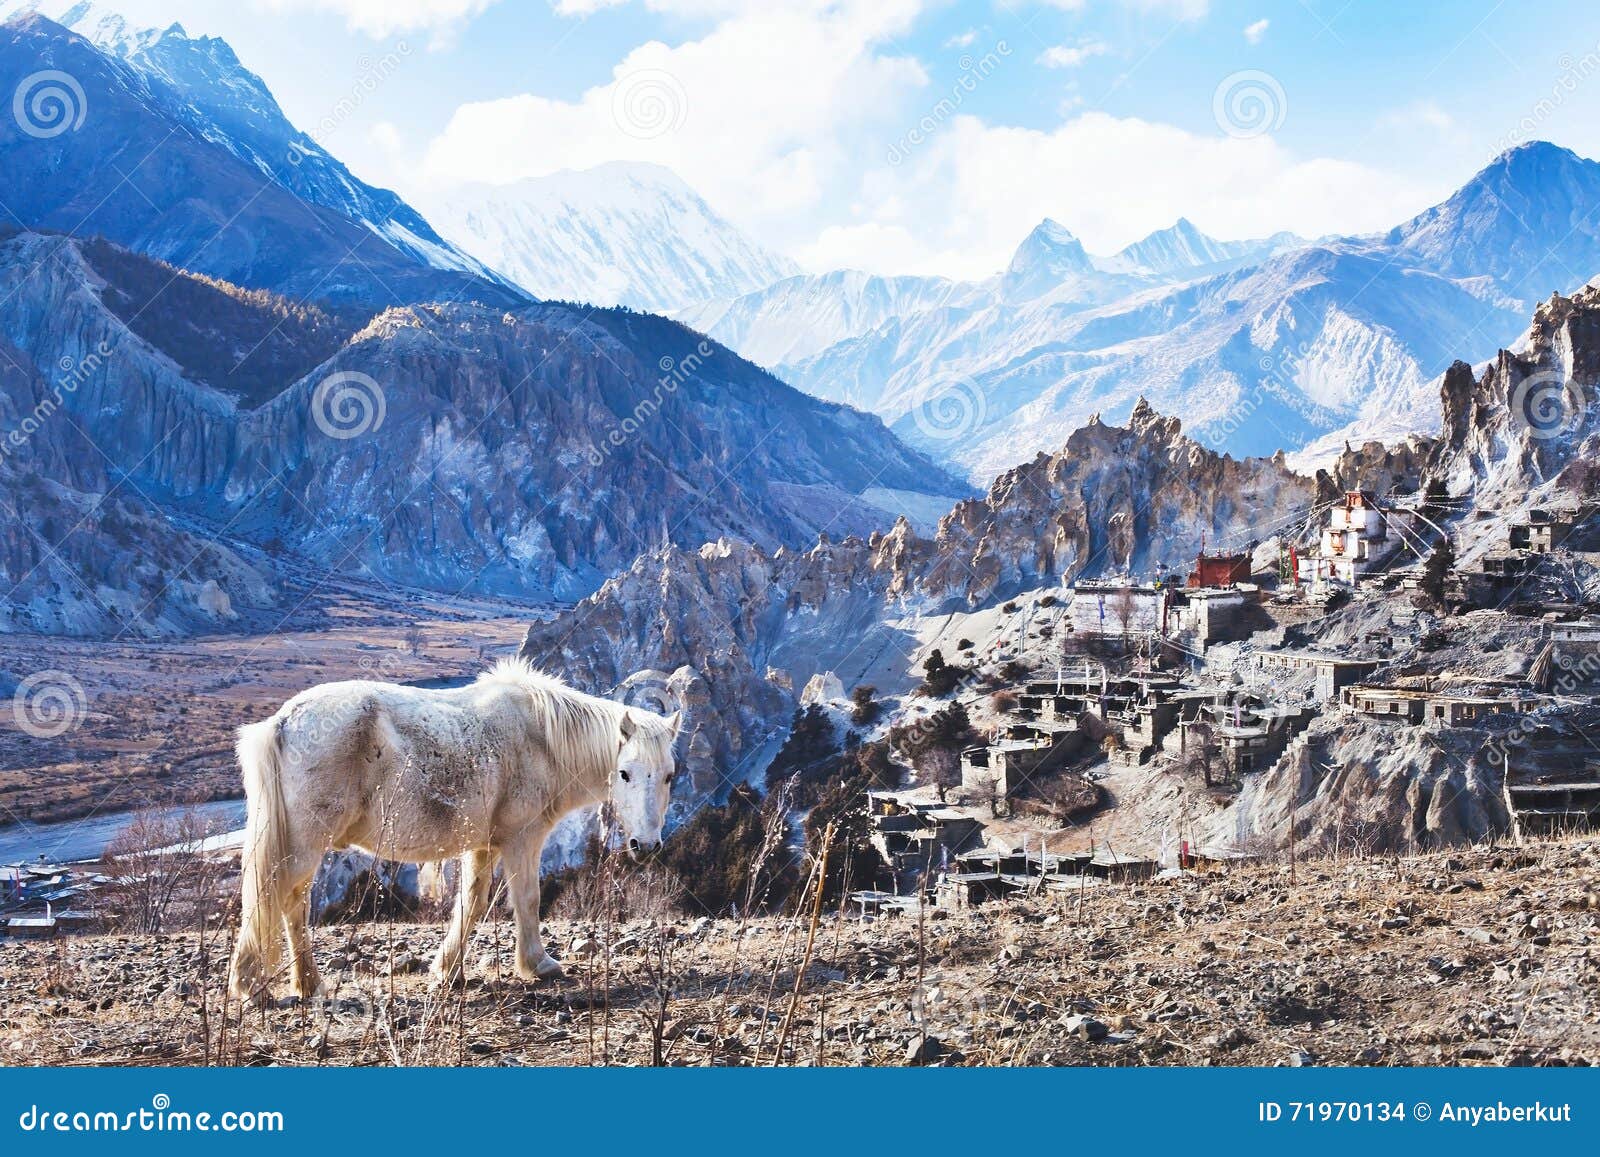 landscape with horse from nepal, tibet